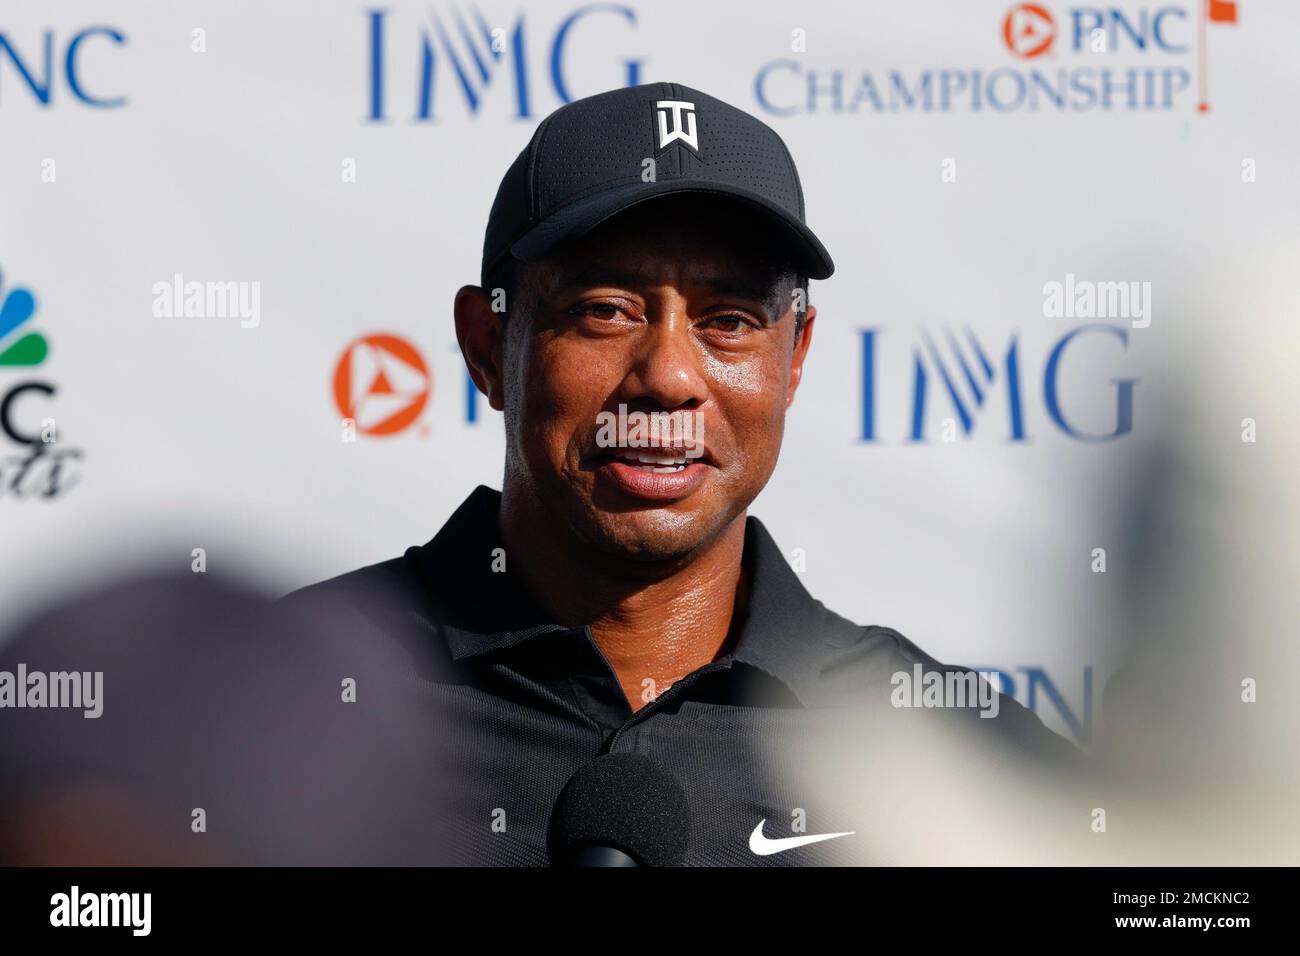 Tiger Woods speaks during a press conference following during the first round of the PNC Championship golf tournament Friday, Dec